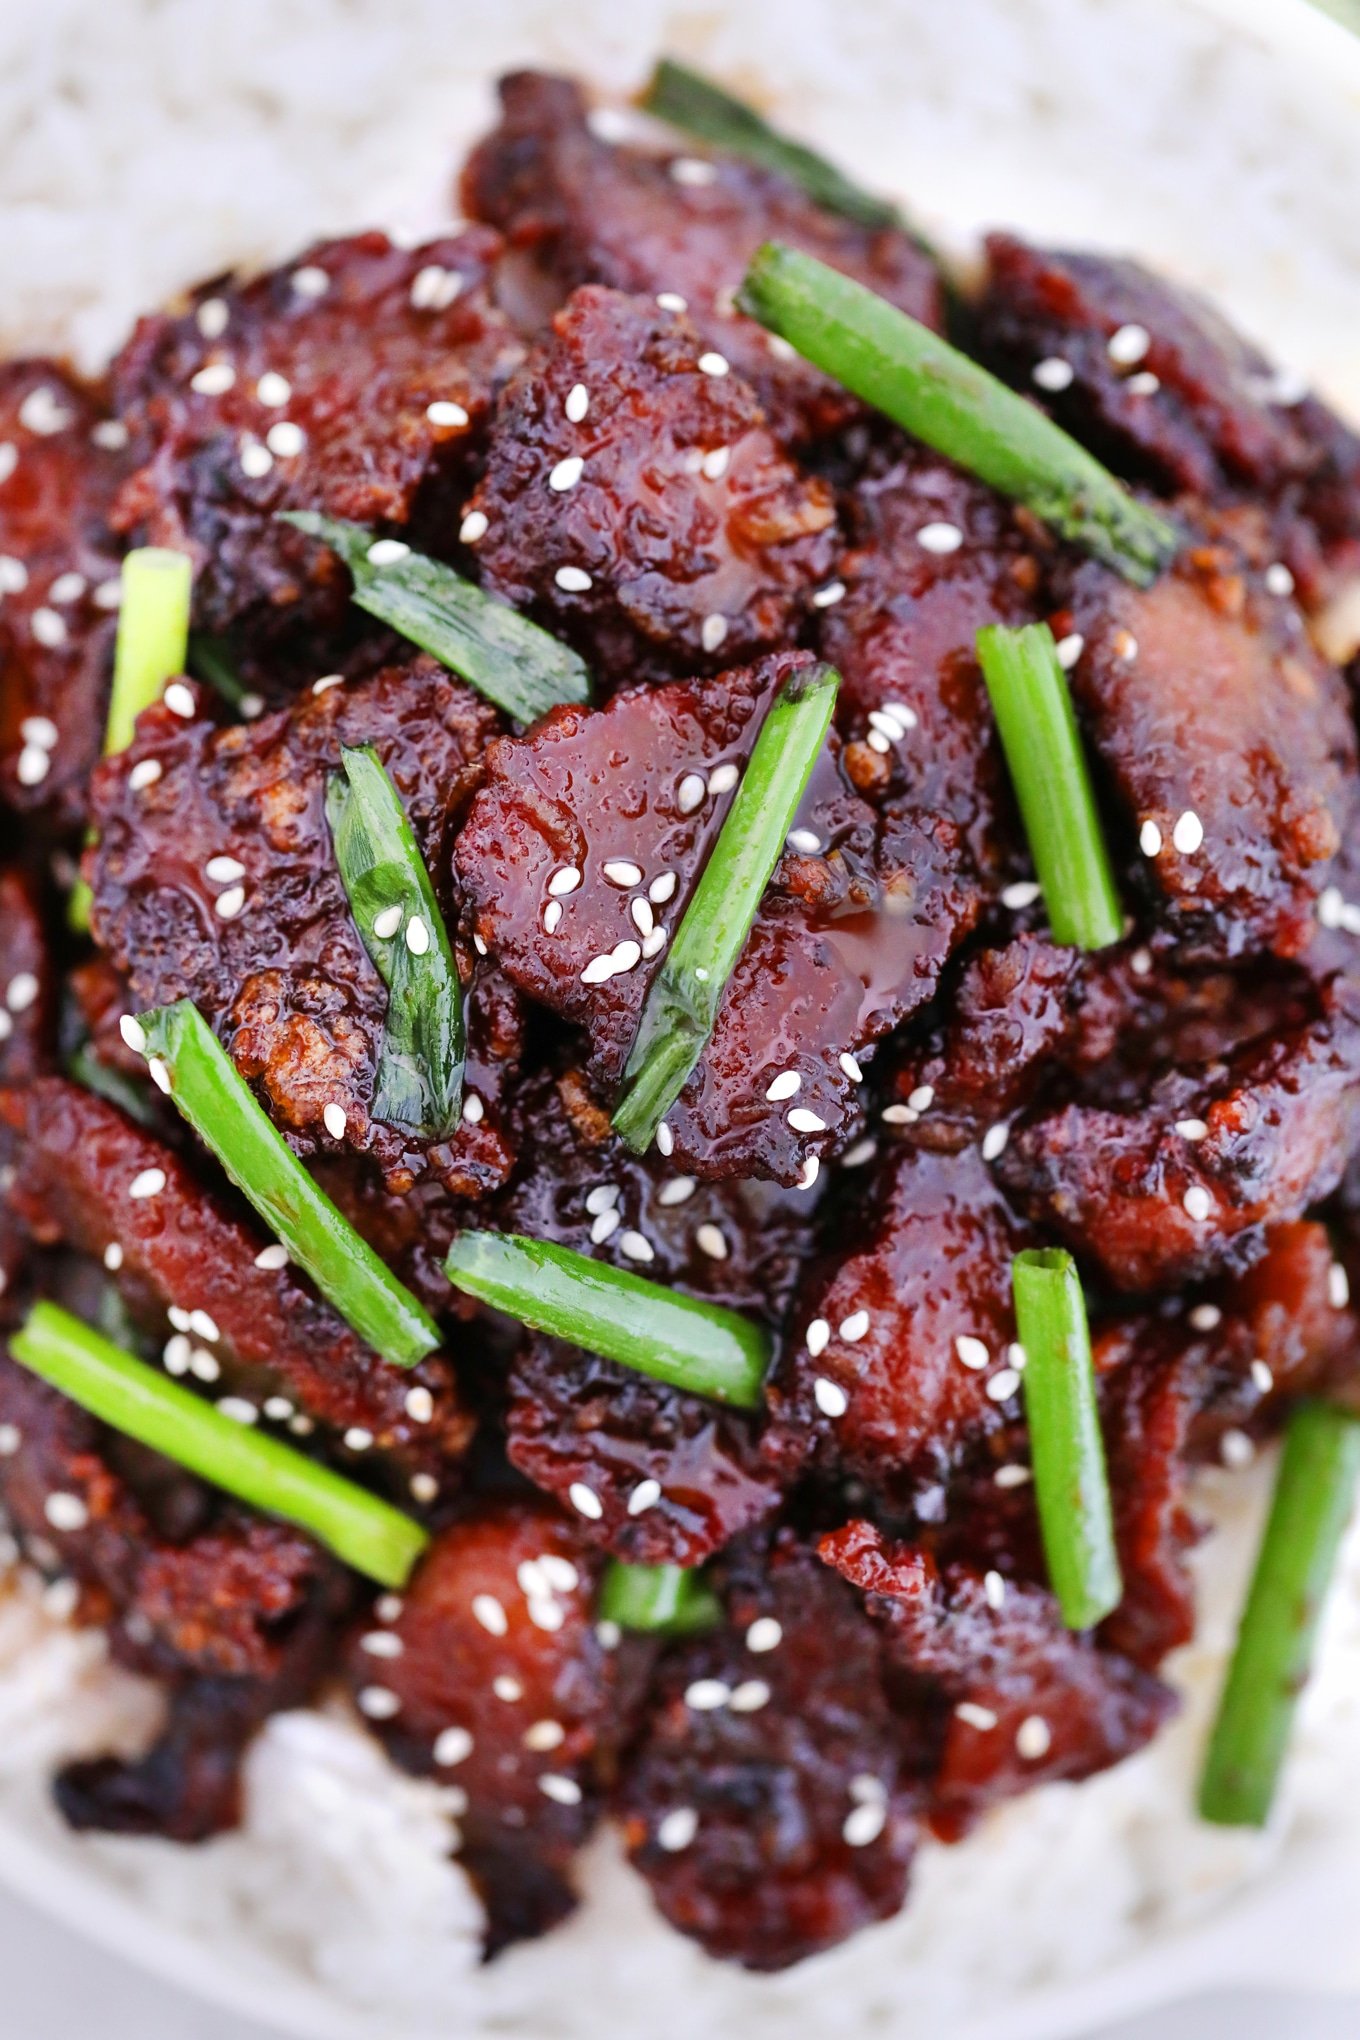 Easiest Way To Make Mongolian Beef Beef Recipes For Dinner